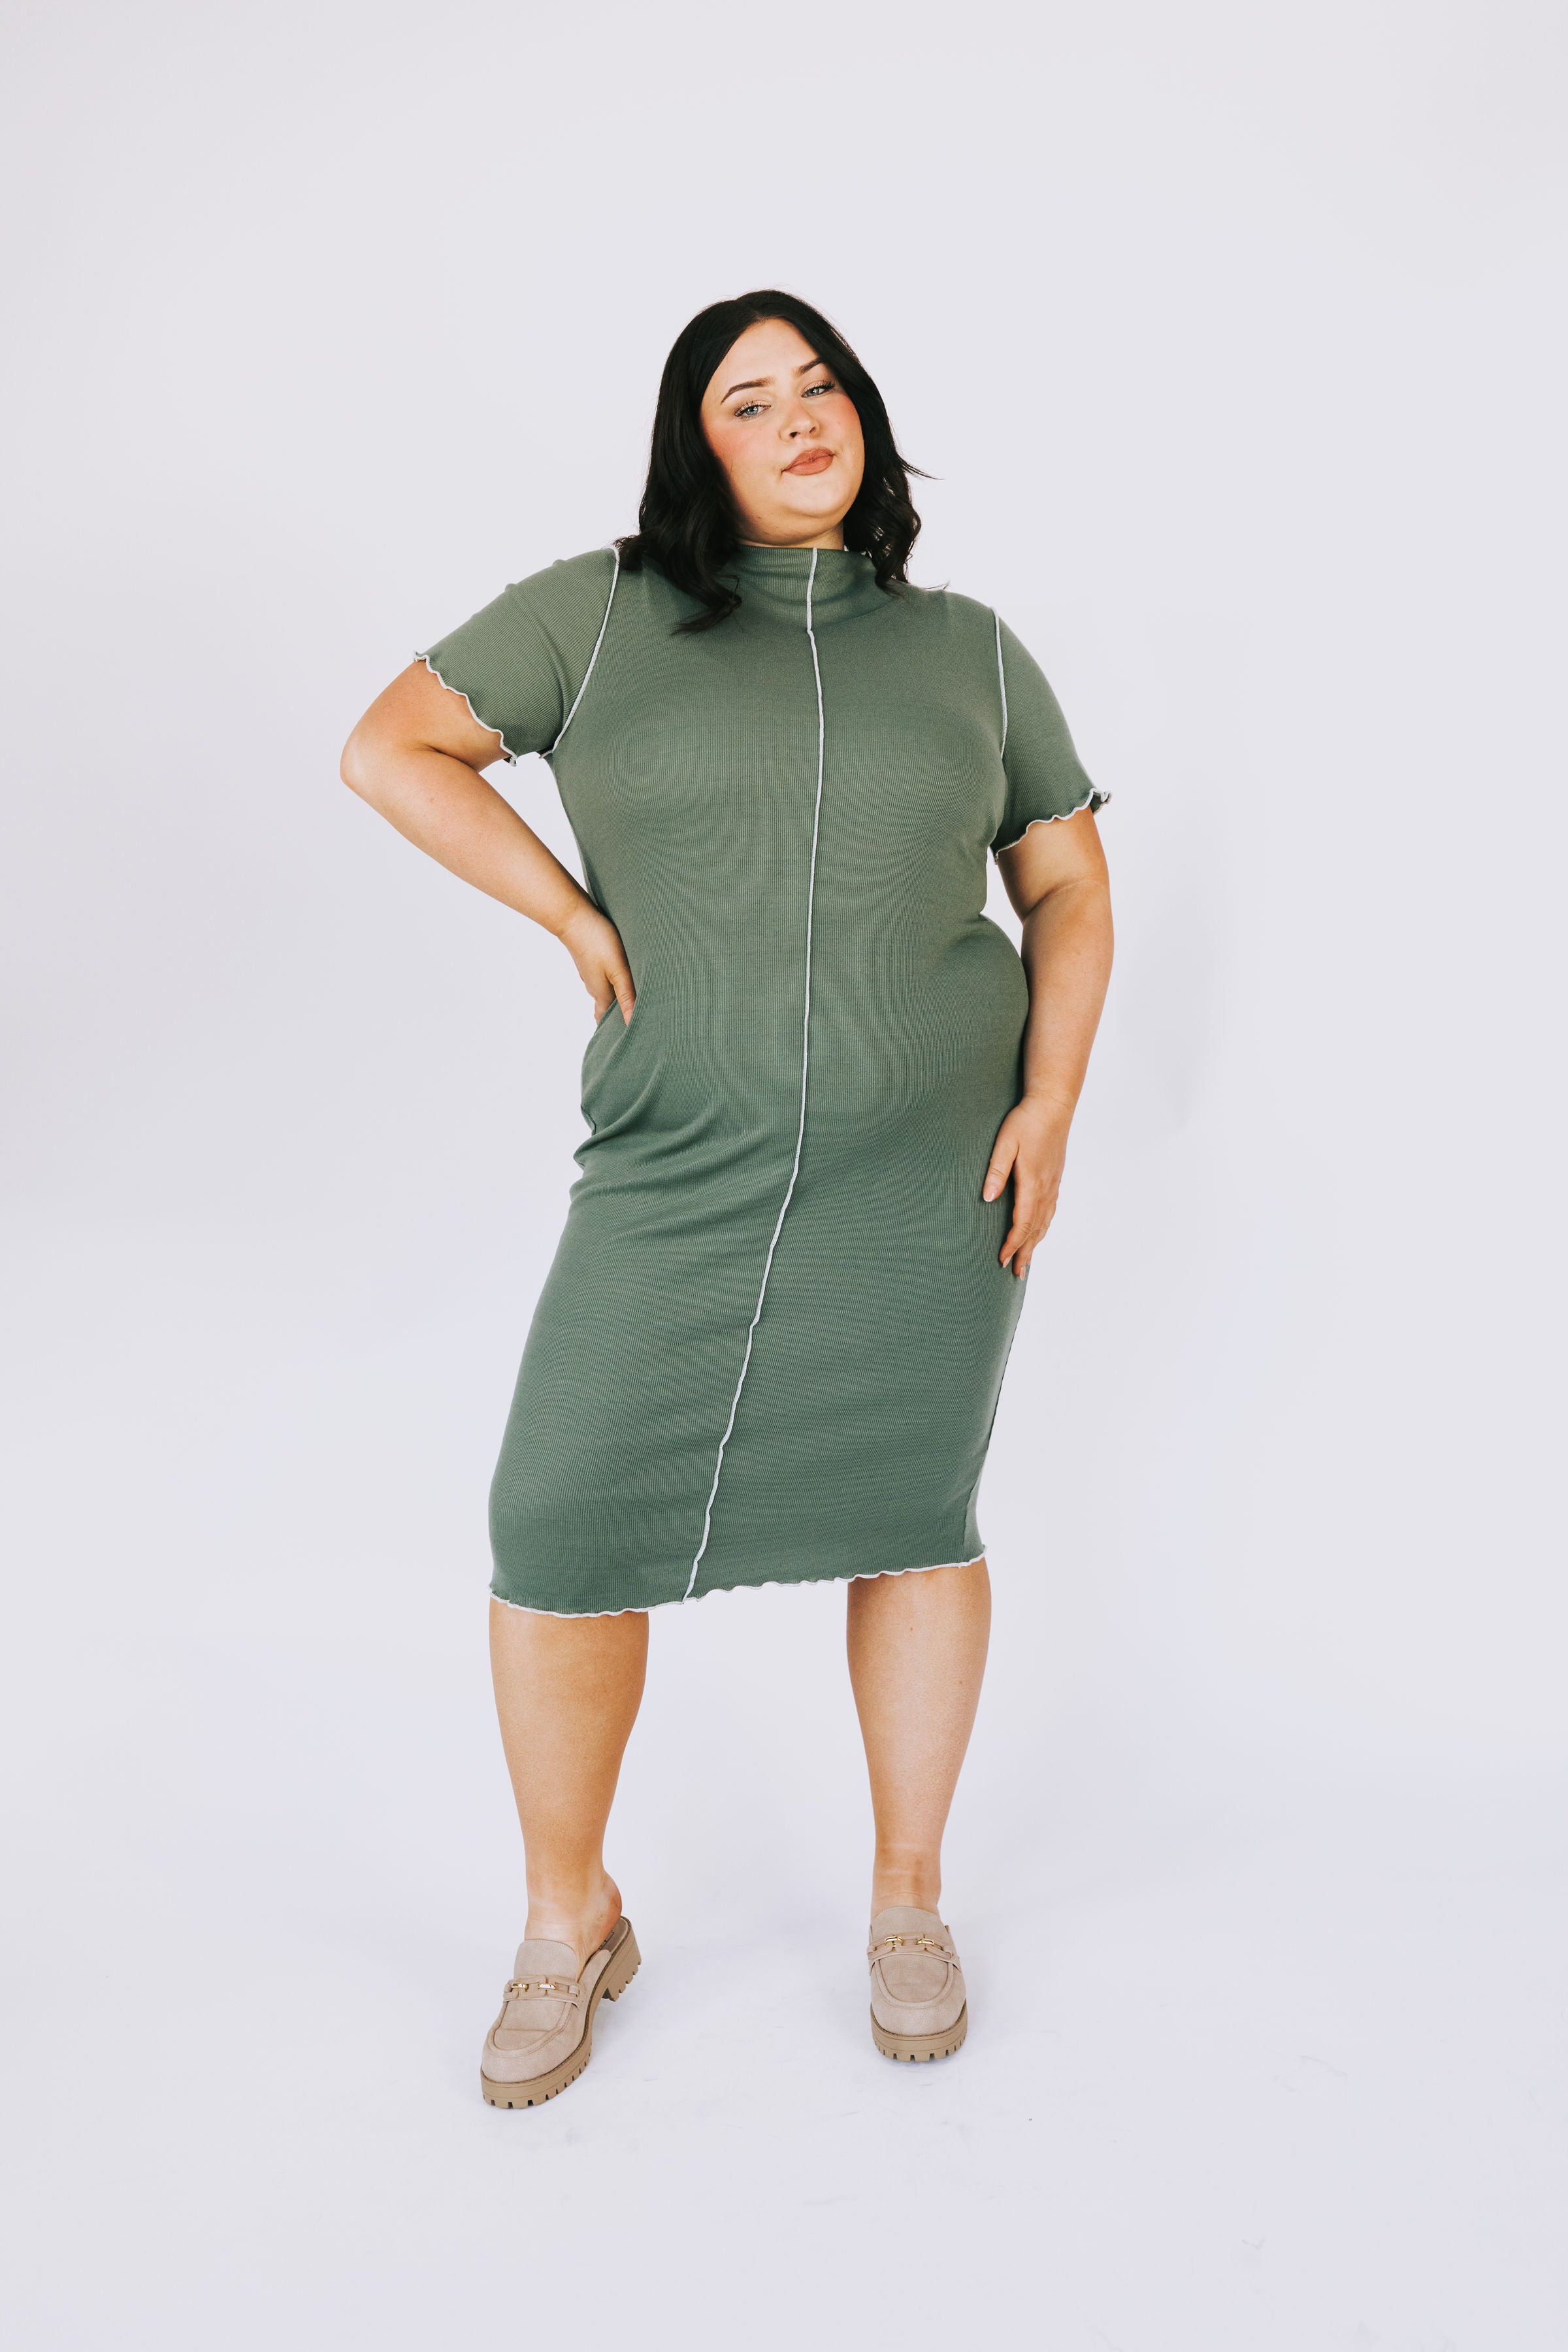 PLUS SIZE - Call My Name Dress